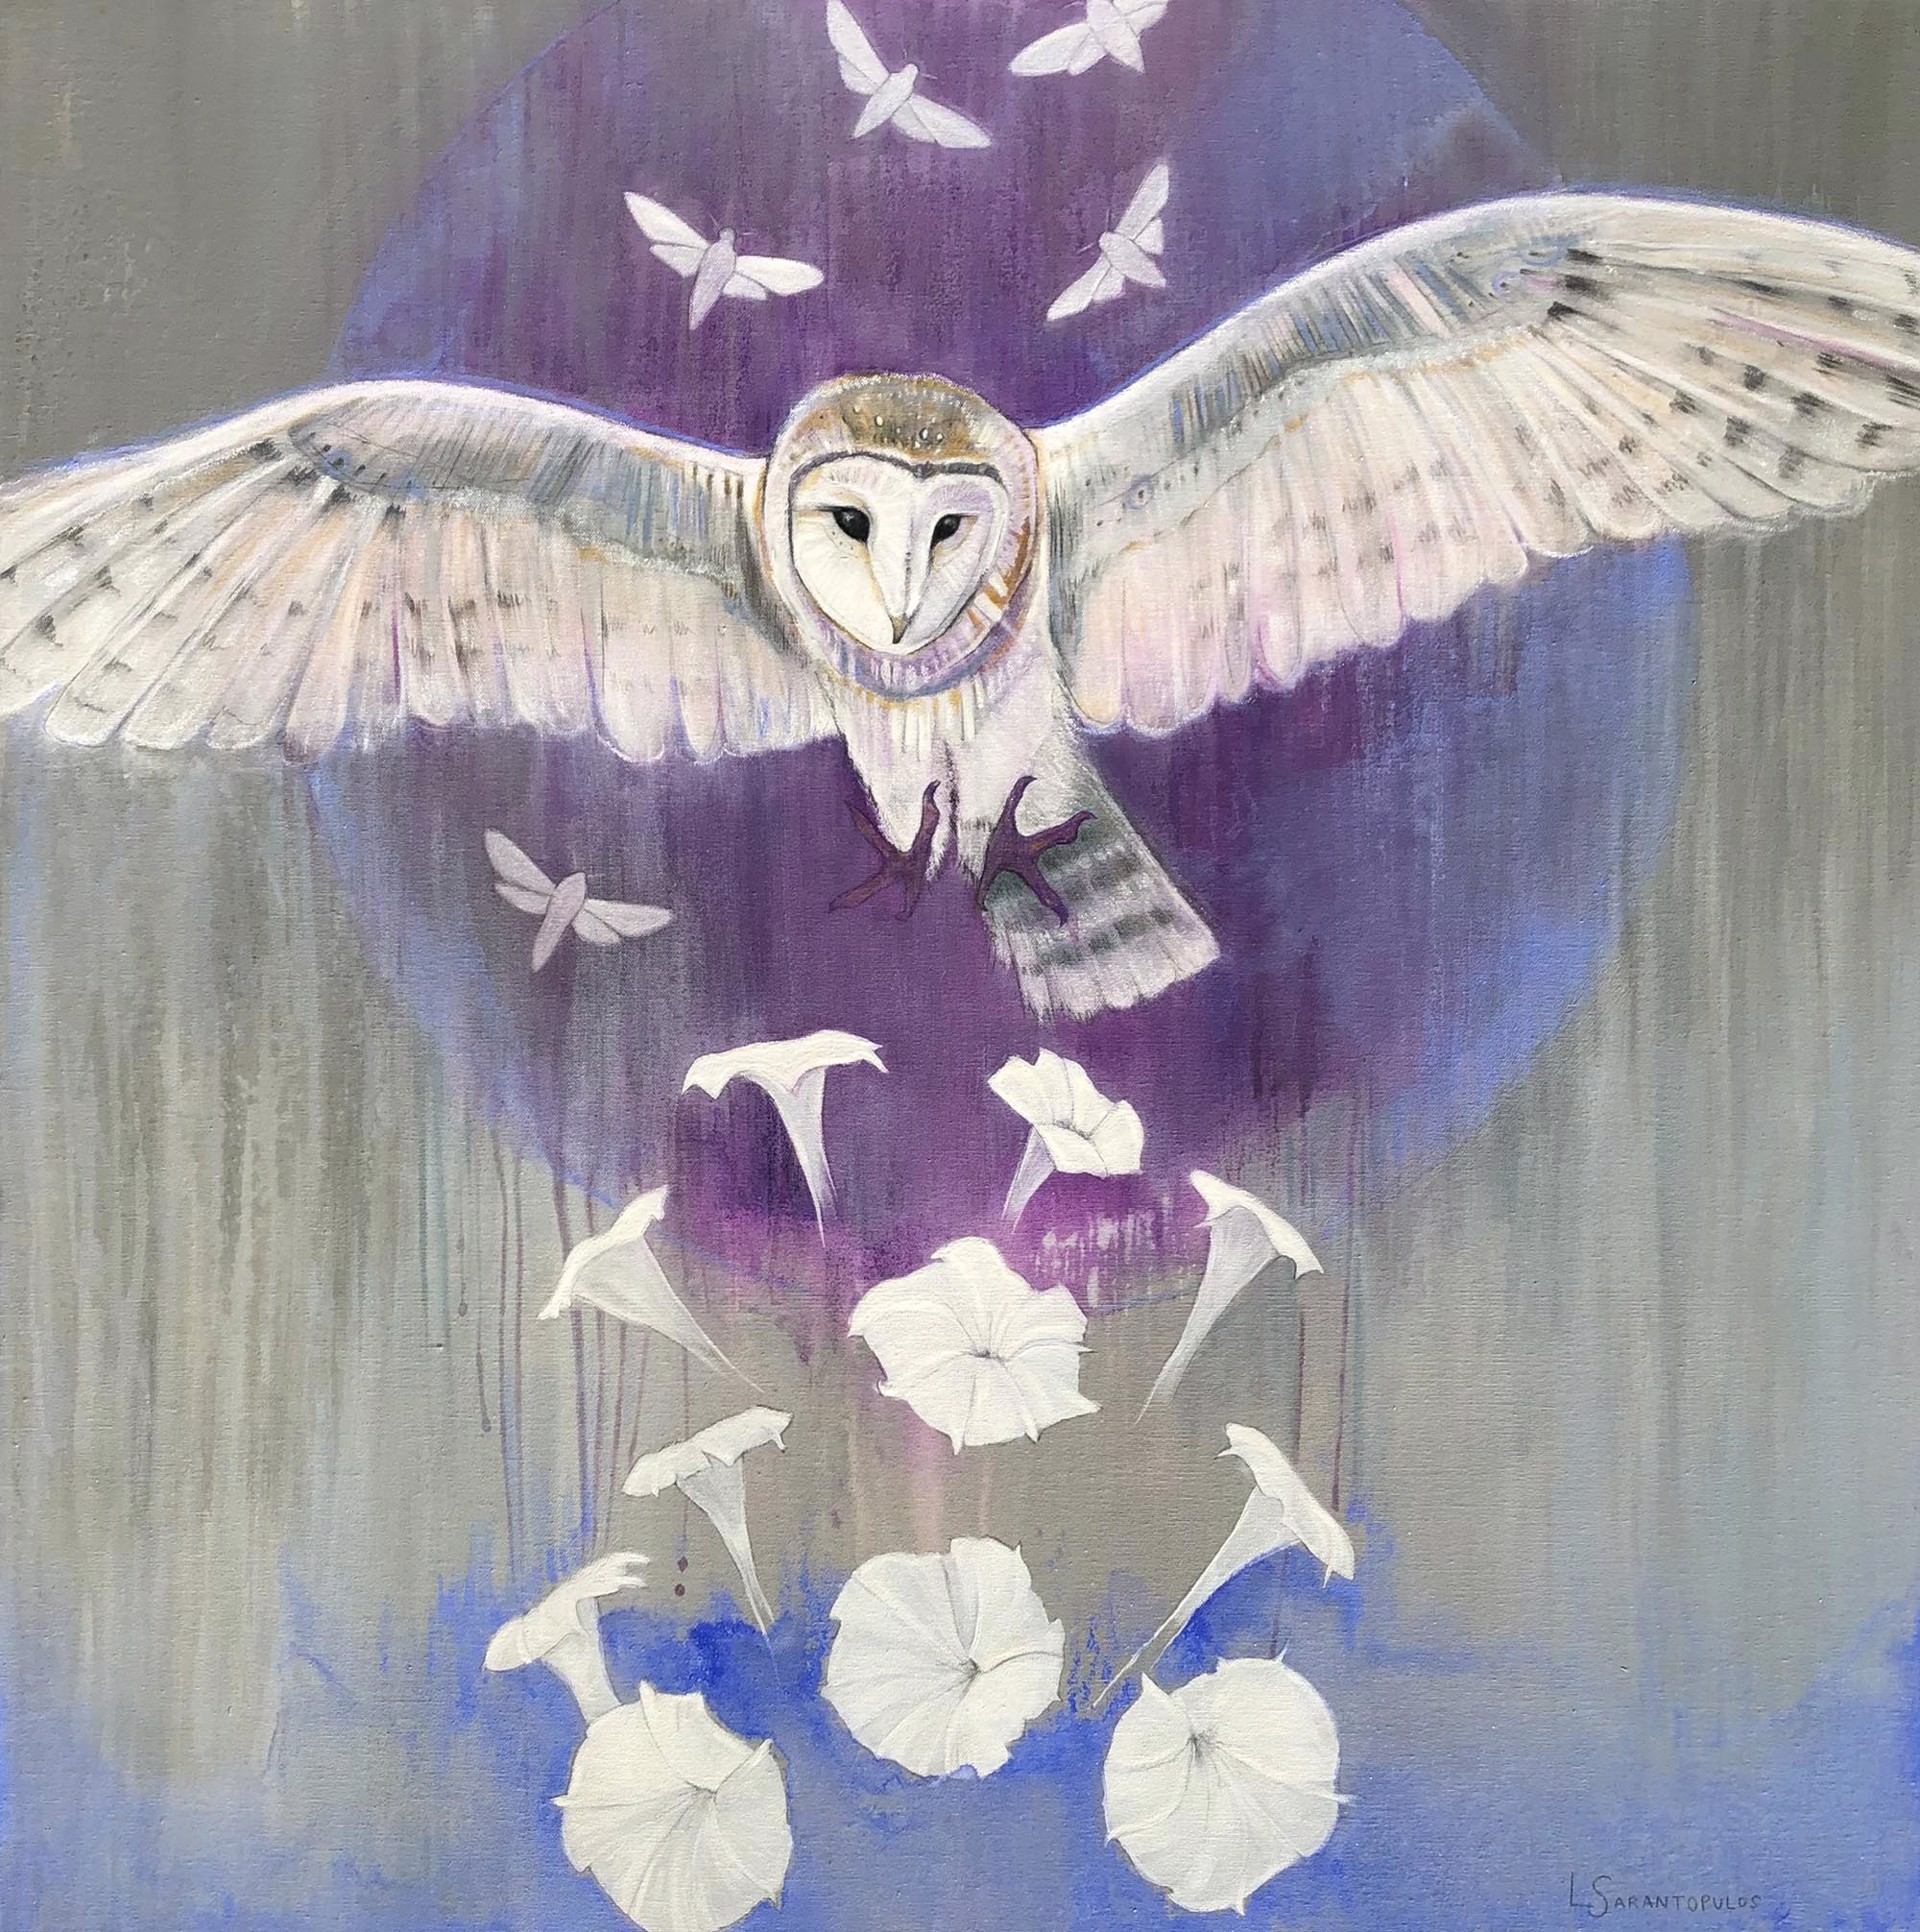 Original Mixed Media Painting Featuring An Owl In Flight Over Purple Circle With Hawkmoons And Flower Details On Abstract Gray Background